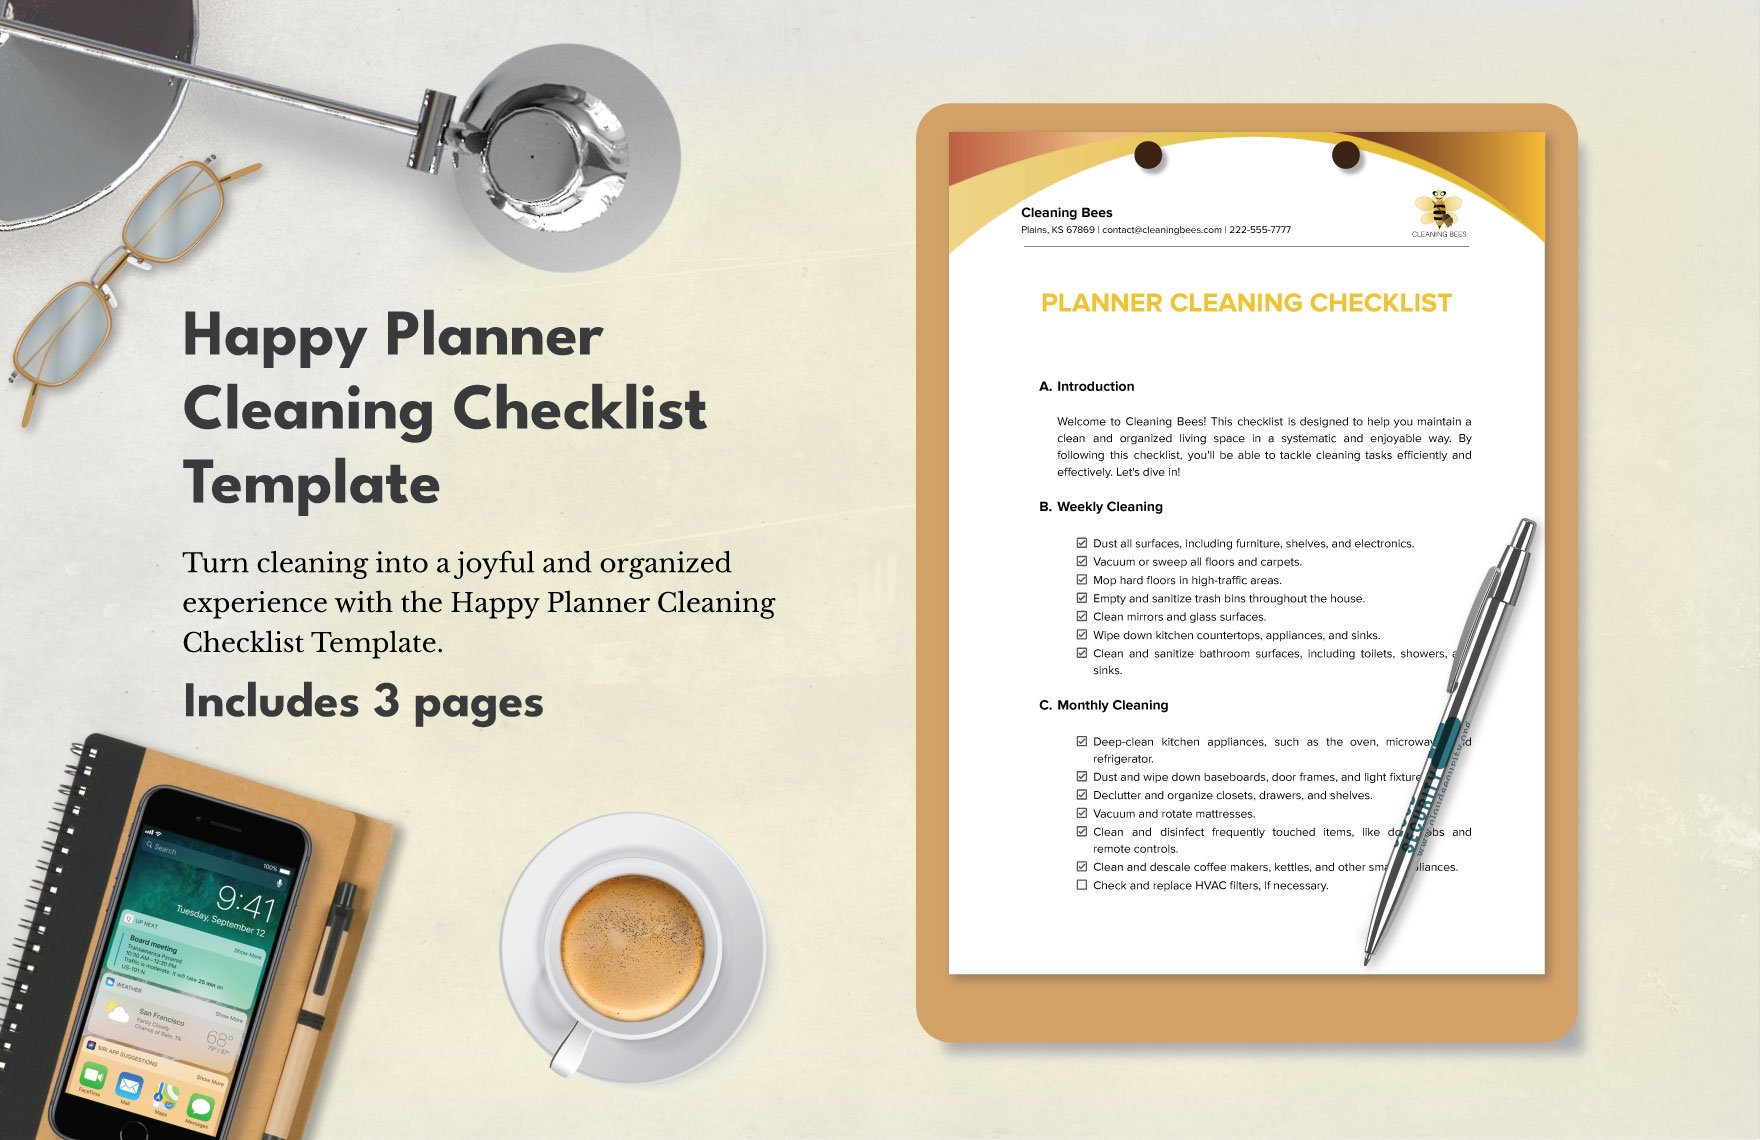 Happy Planner Cleaning Checklist Template